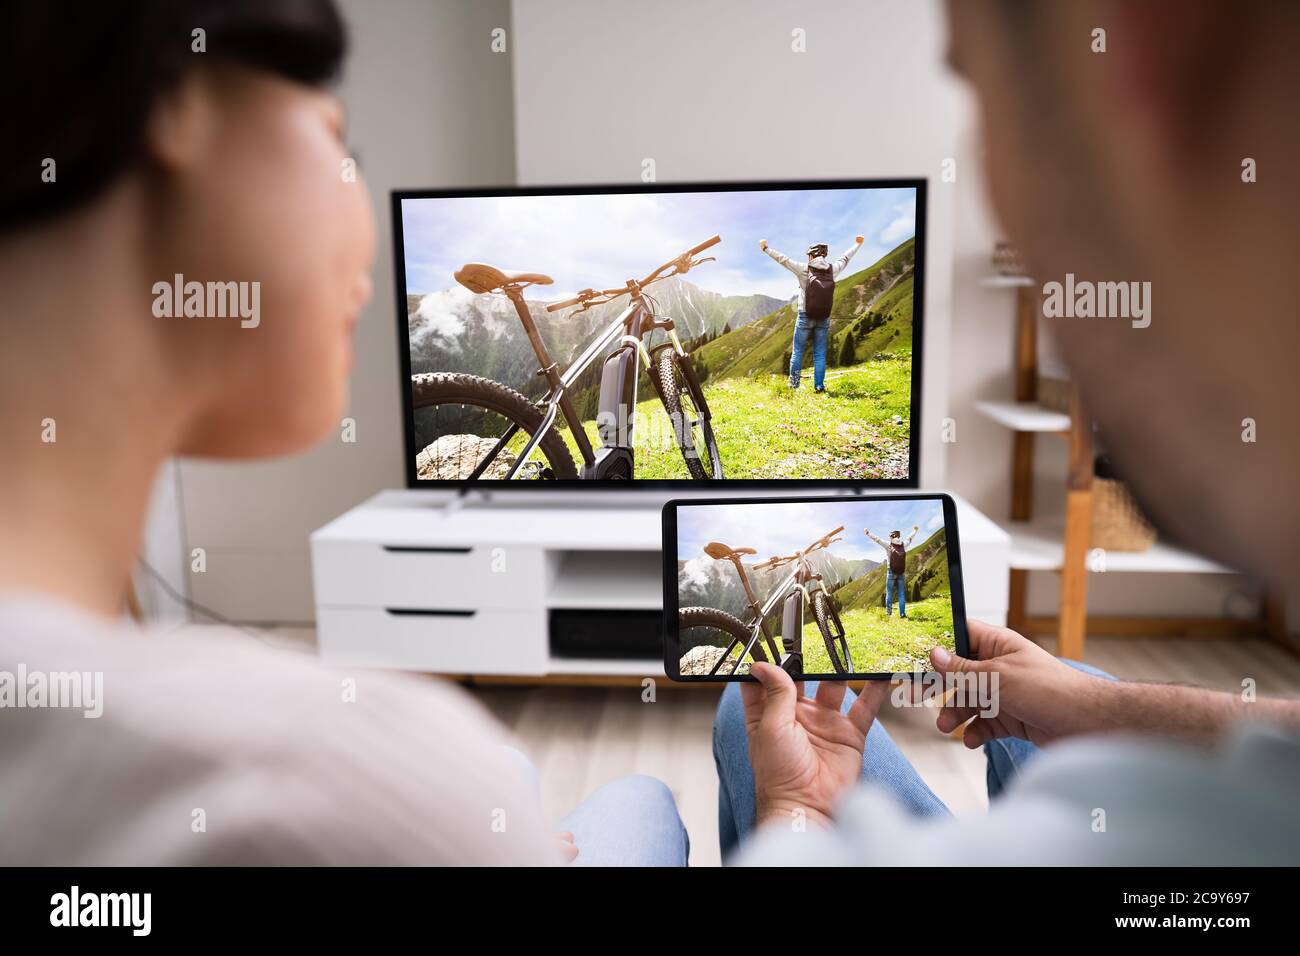 Family Watching TV Through Tablet Television And Movie Streaming Stock Photo